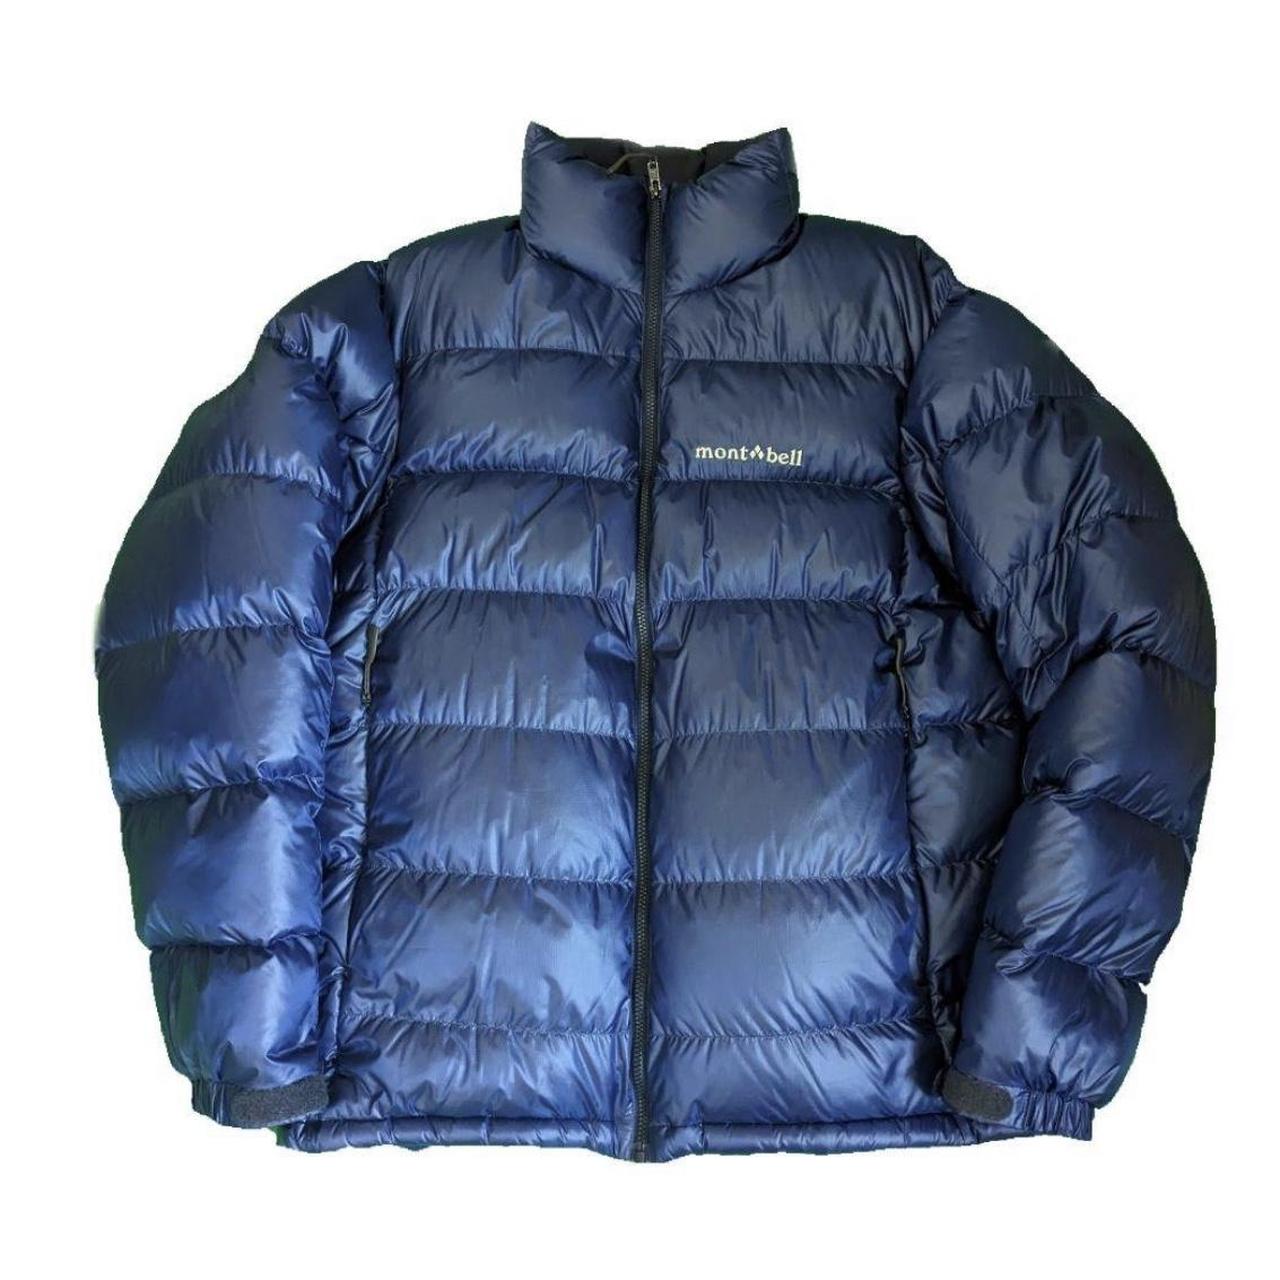 mont-bell puffer jacket y2k-